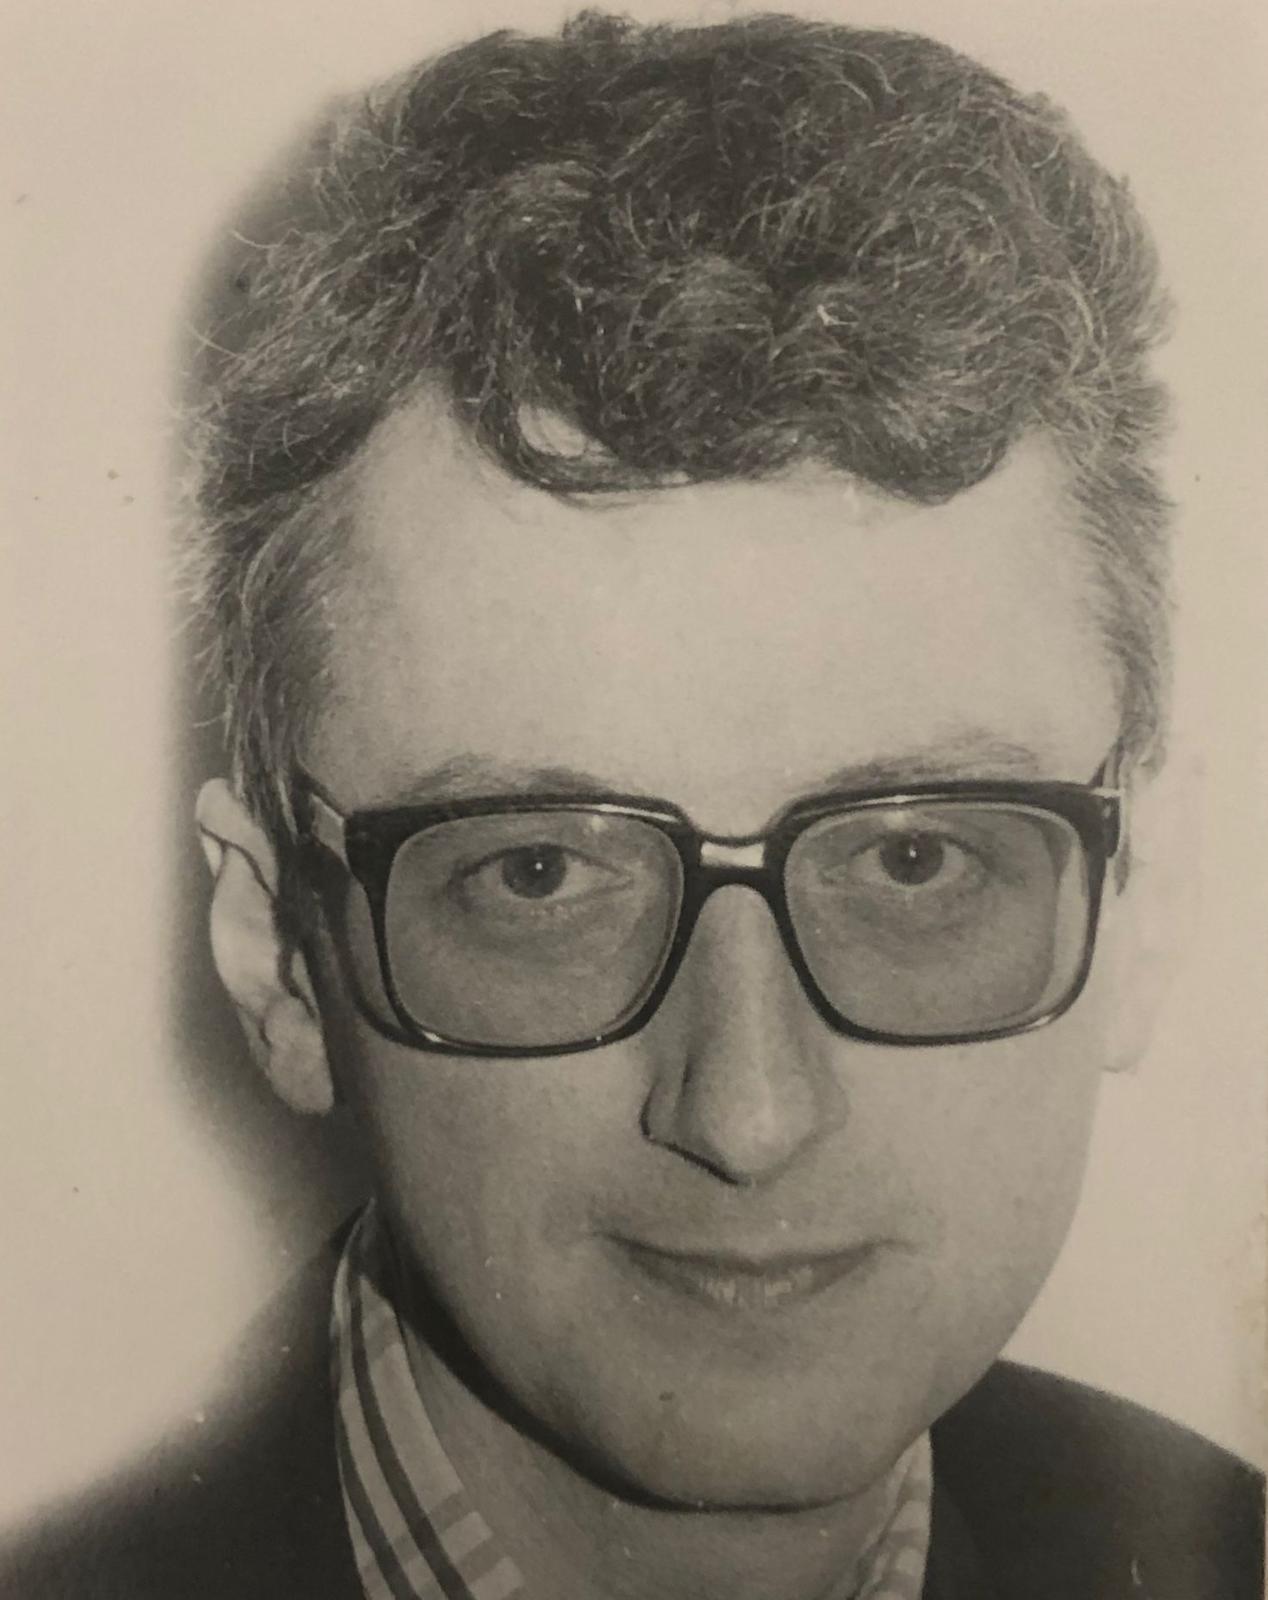 REMEMBERED: Tributes have been paid to former De La Salle College Science teacher John Finan